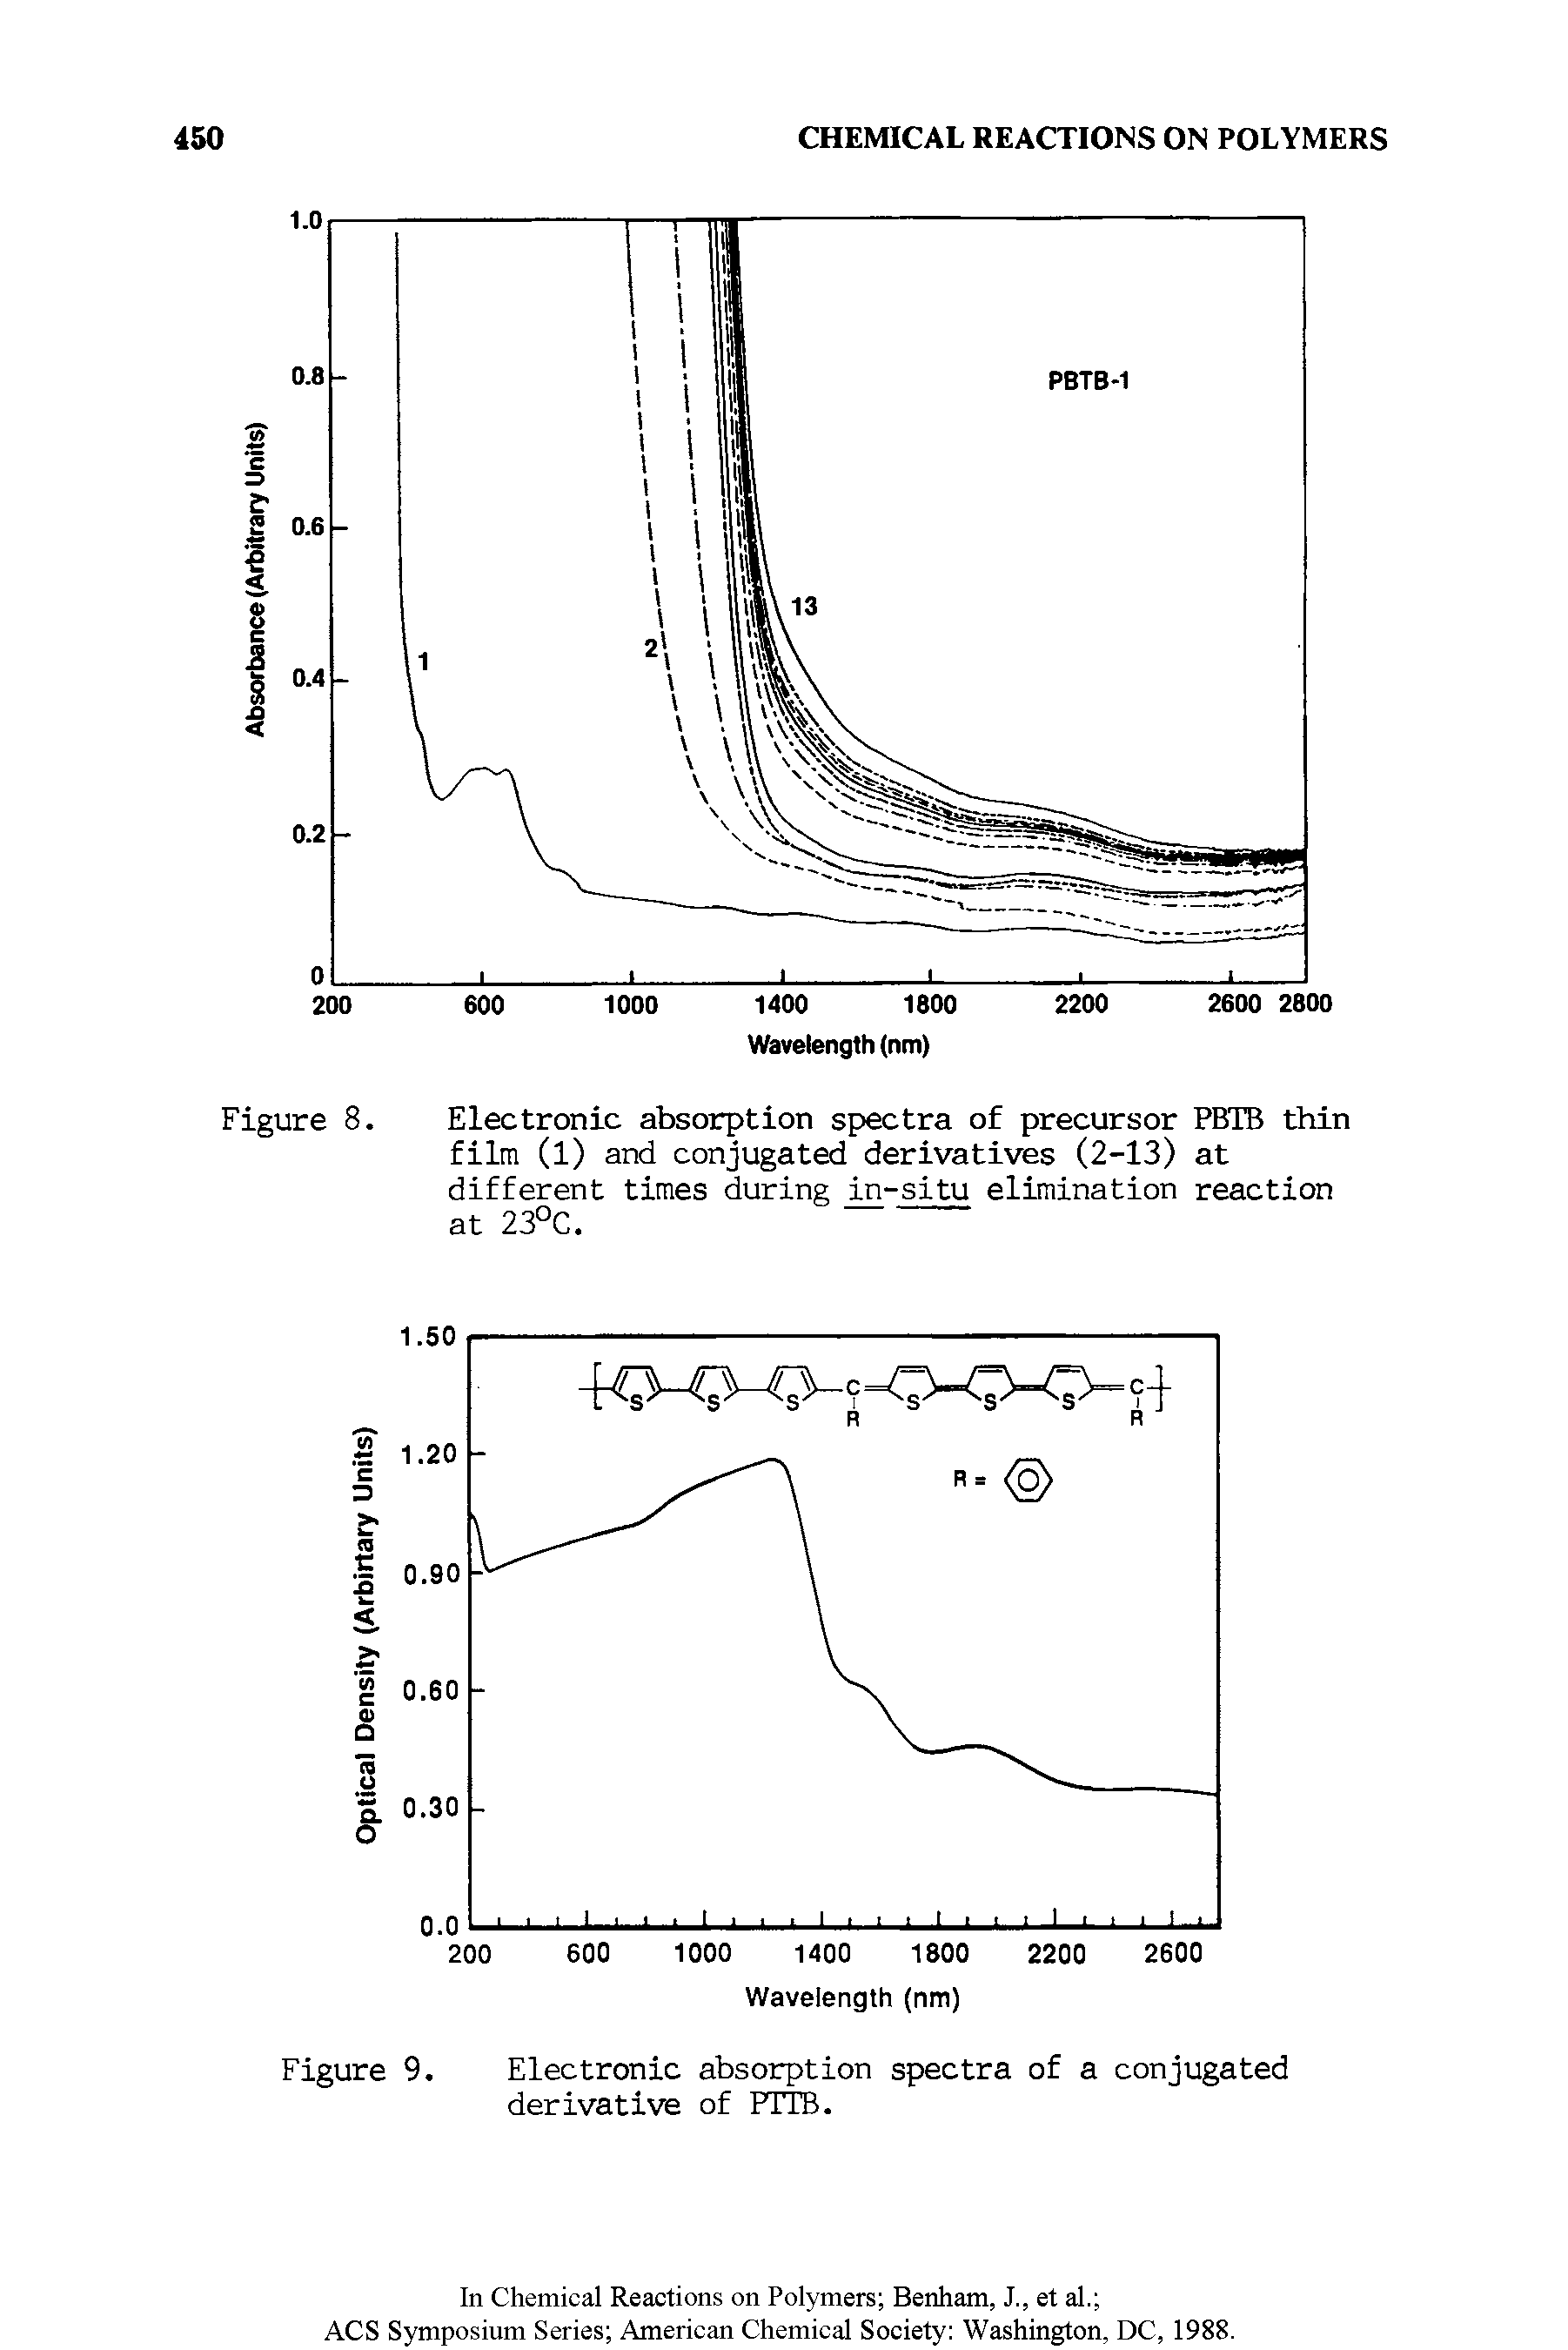 Figure 9. Electronic absorption spectra of a conjugated derivative of FTTB.